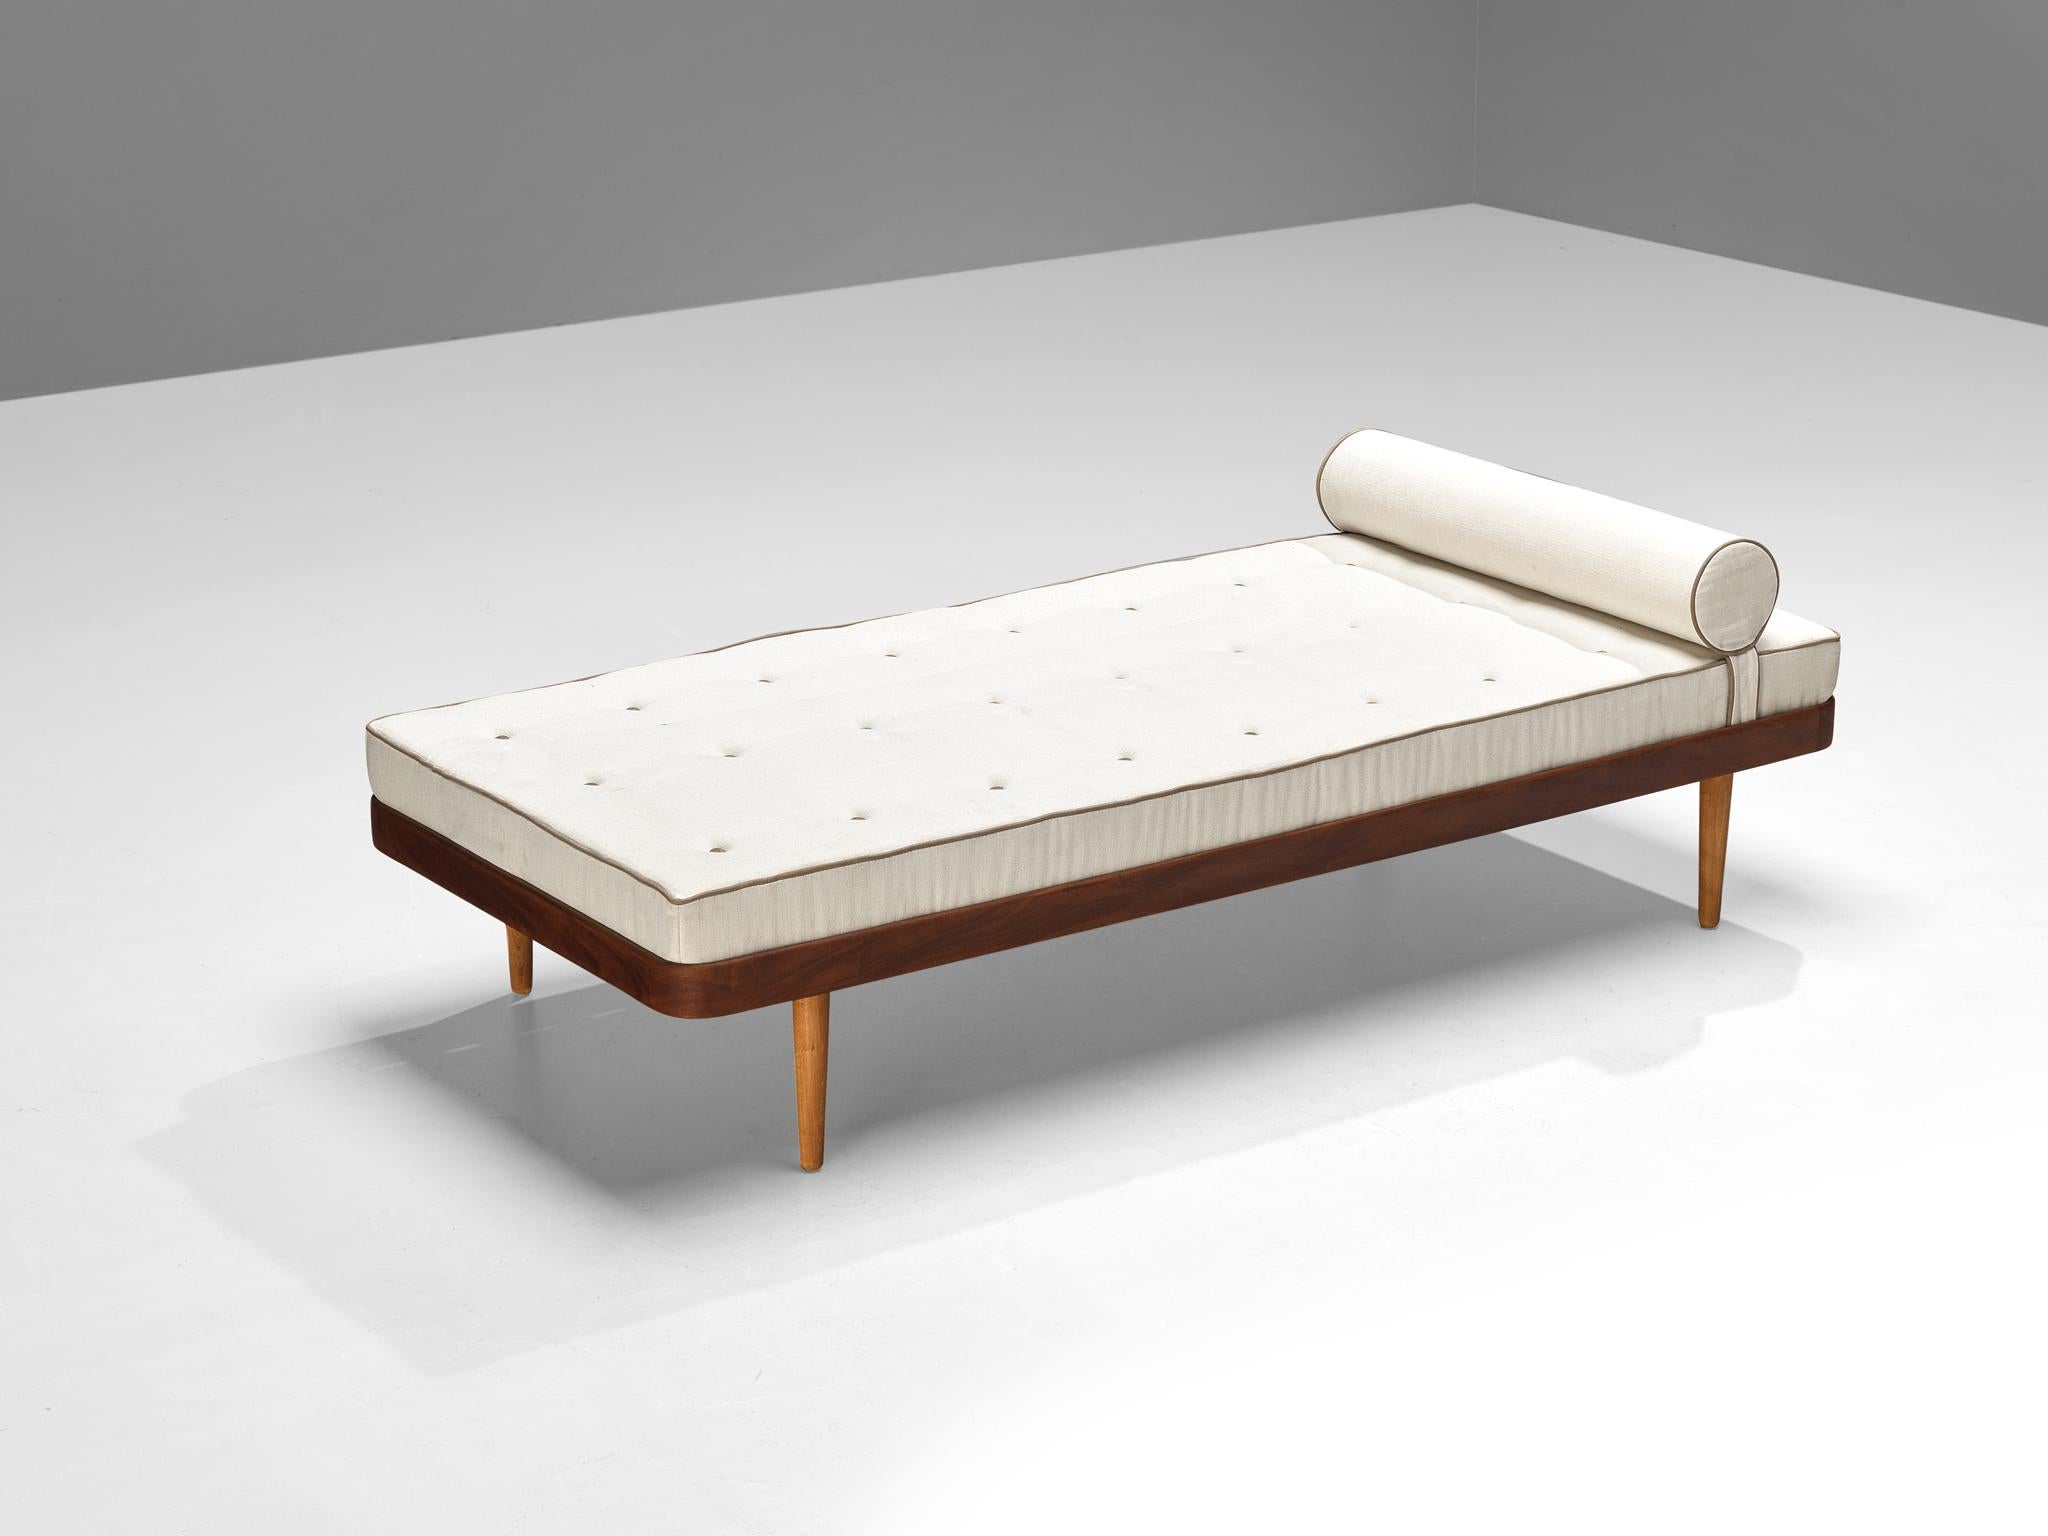 Daybed, teak, beech, Scandinavia, 1960s

A simple and minimalist single or daybed made in Scandinavia in the 1960s.  The construction is based on clear lines and angular shapes. Its simple and pure exterior will come forward nicely in a relaxing